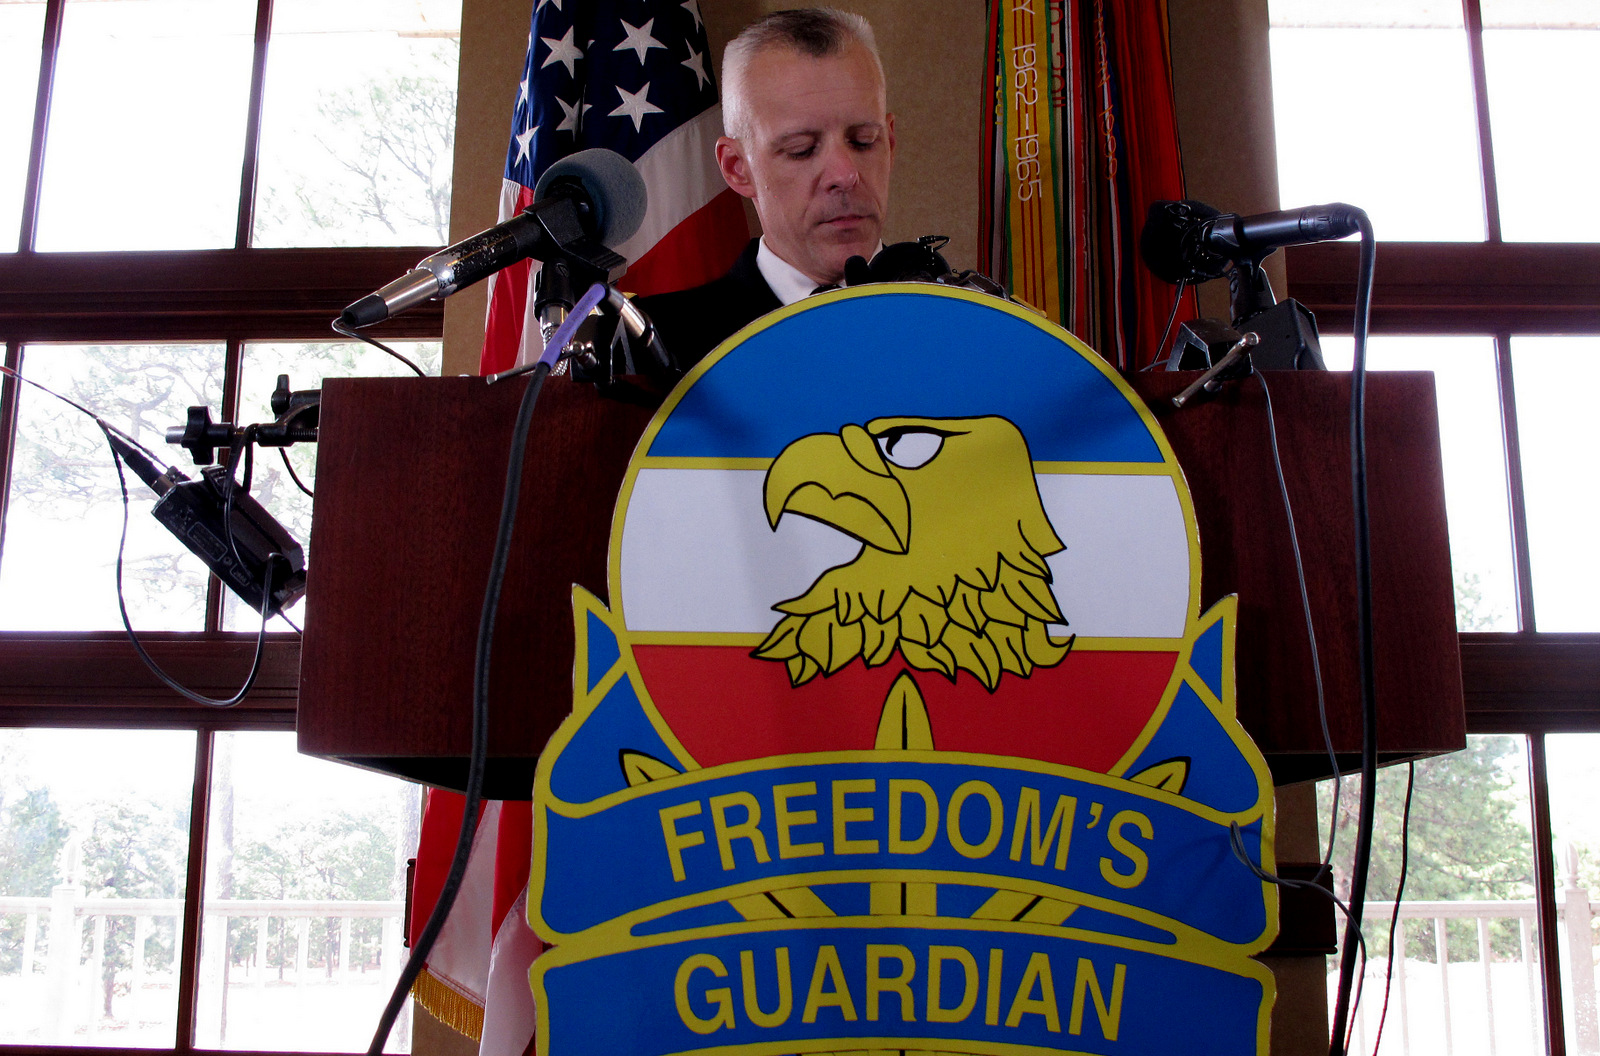 U.S. Army Col. Daniel King addresses the news media about charges against Army Sgt. Bowe Bergdahl at Fort Bragg, N.C., on Wednesday, March 25, 2015. Bergdahl, who abandoned his post in Afghanistan and was held captive for five years by the Taliban, was charged Wednesday by the U.S. military with desertion and misbehavior before the enemy and could get life in prison if convicted. (AP Photo/Allen G. Breed)